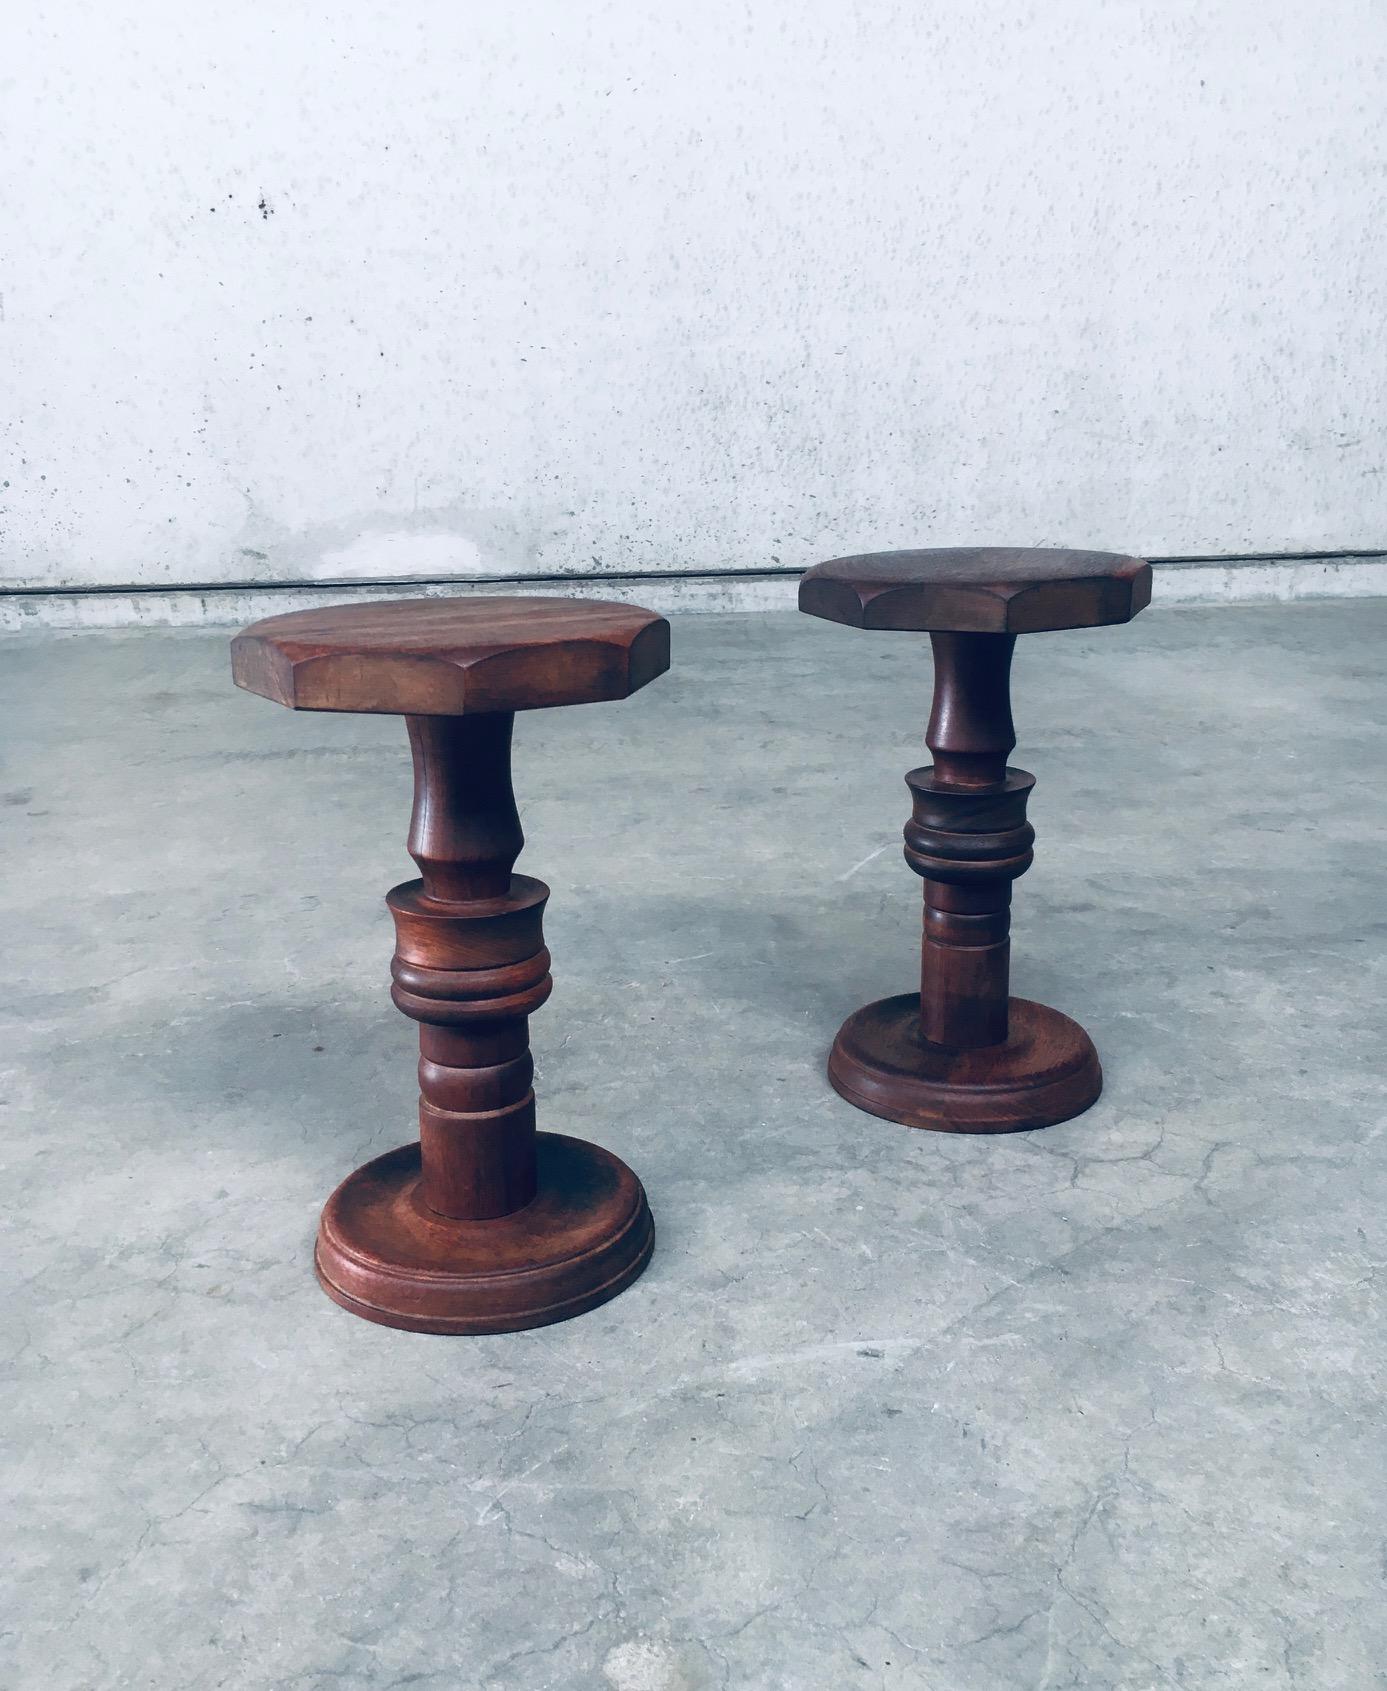 Brutalist Design Hand Crafted Art Populaire Side table / plant stool set in the style of Charles Dudouyt Designs. Made in France, 1940's period. Solid wood constructed and hand turned side tables with octagonal top. They both come in very good